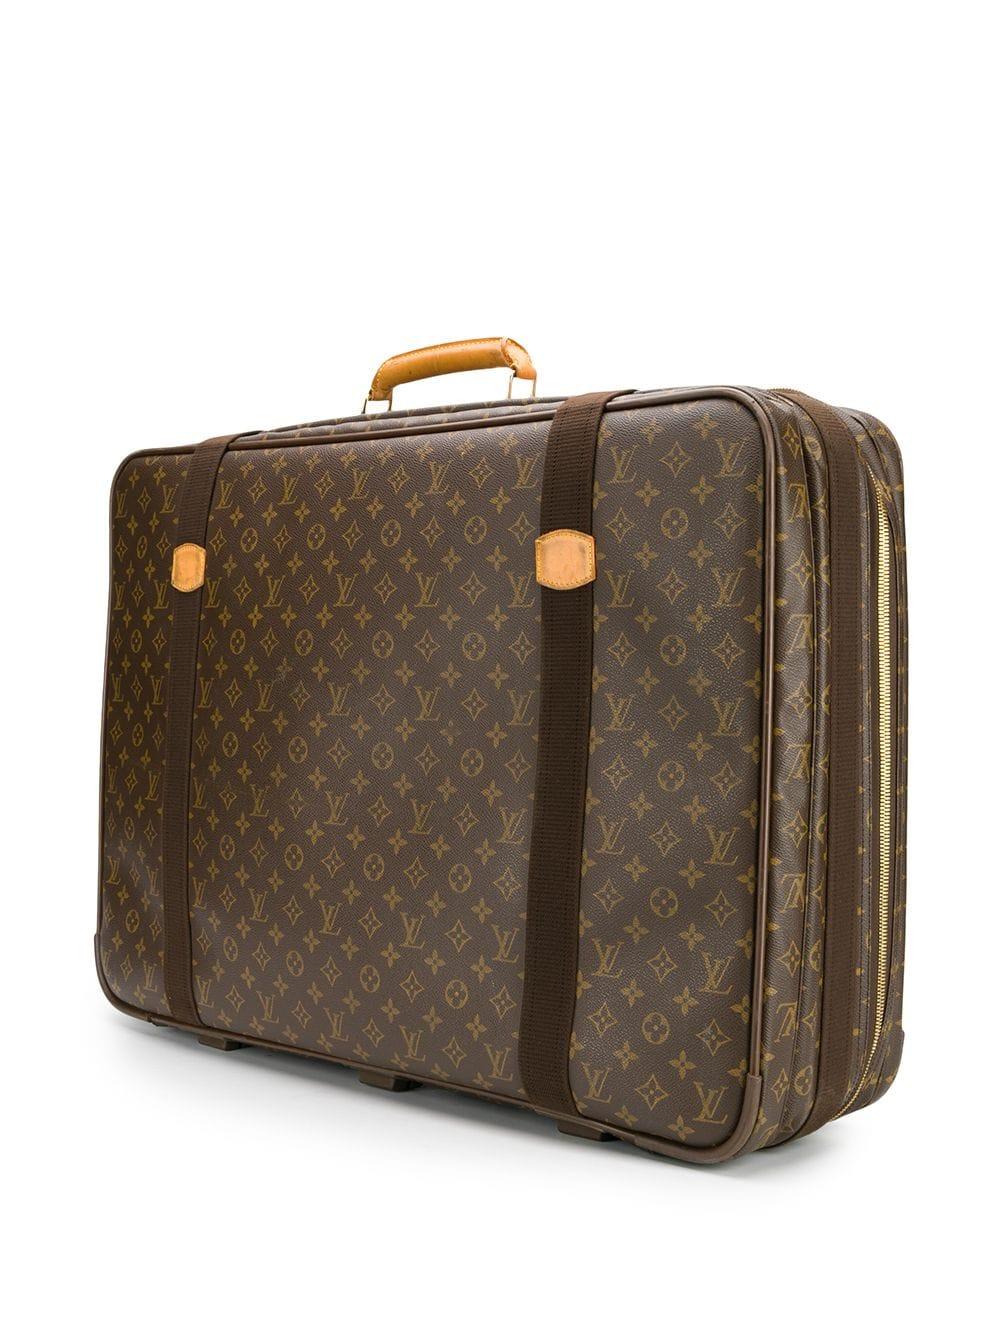 Travel in style with this large-sized suitcase by Louis Vuitton, crafted in France from the brand's iconic beige & brown monogram print canvas and featuring a structured top-handle design, leather trim, buckle fastenings and a zip-around closure